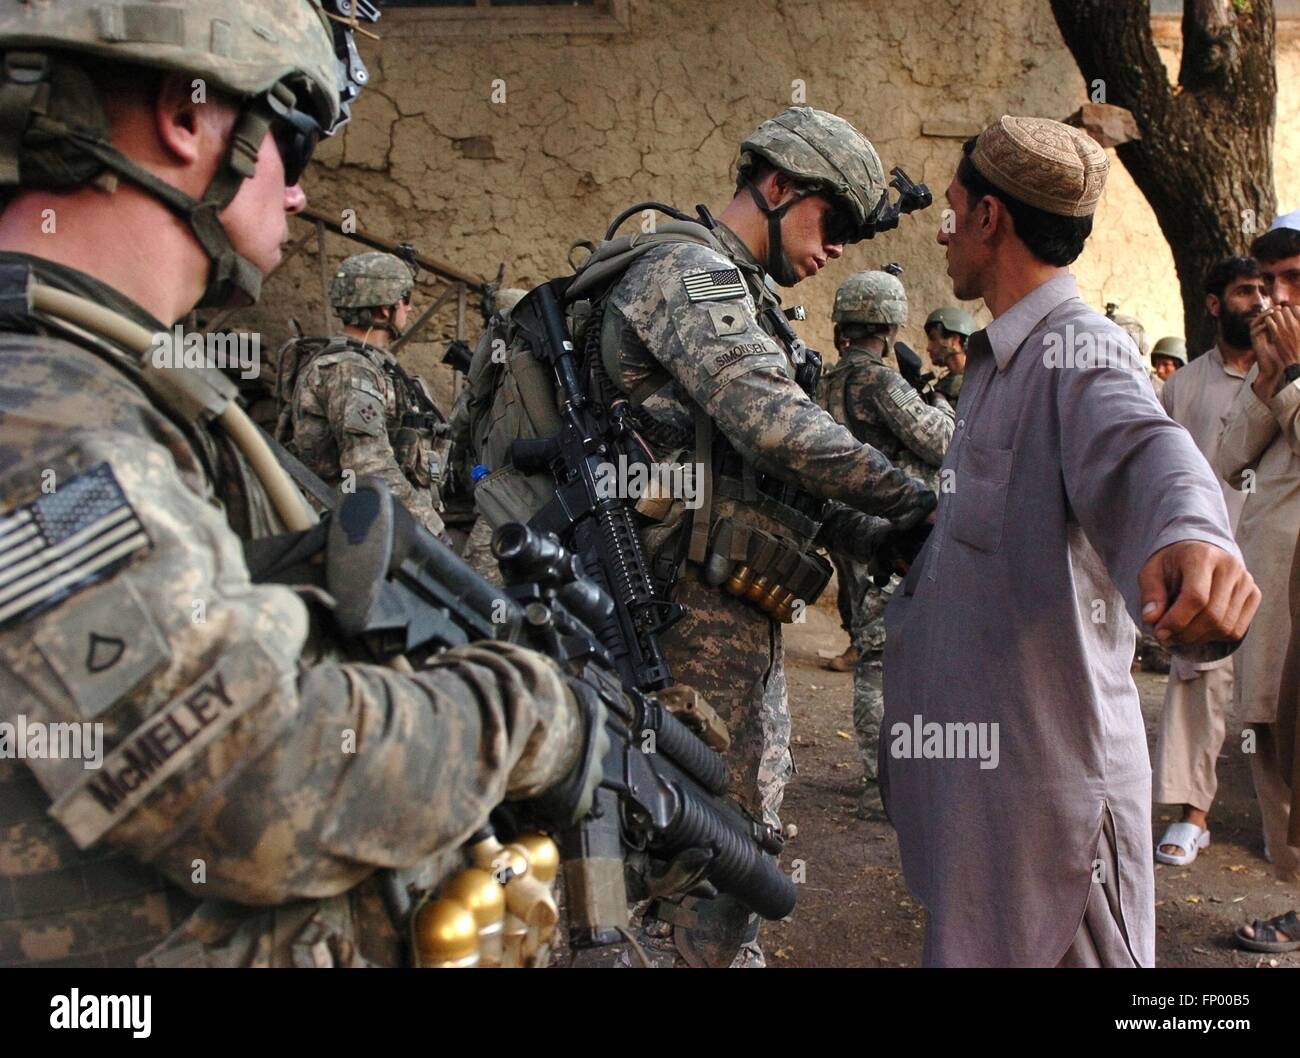 U.S. Army soldiers search a suspicious and during an anti-insurgents patrol October 1, 2009 in the Korengal Valley, Kunar Province, Afghanistan. Stock Photo